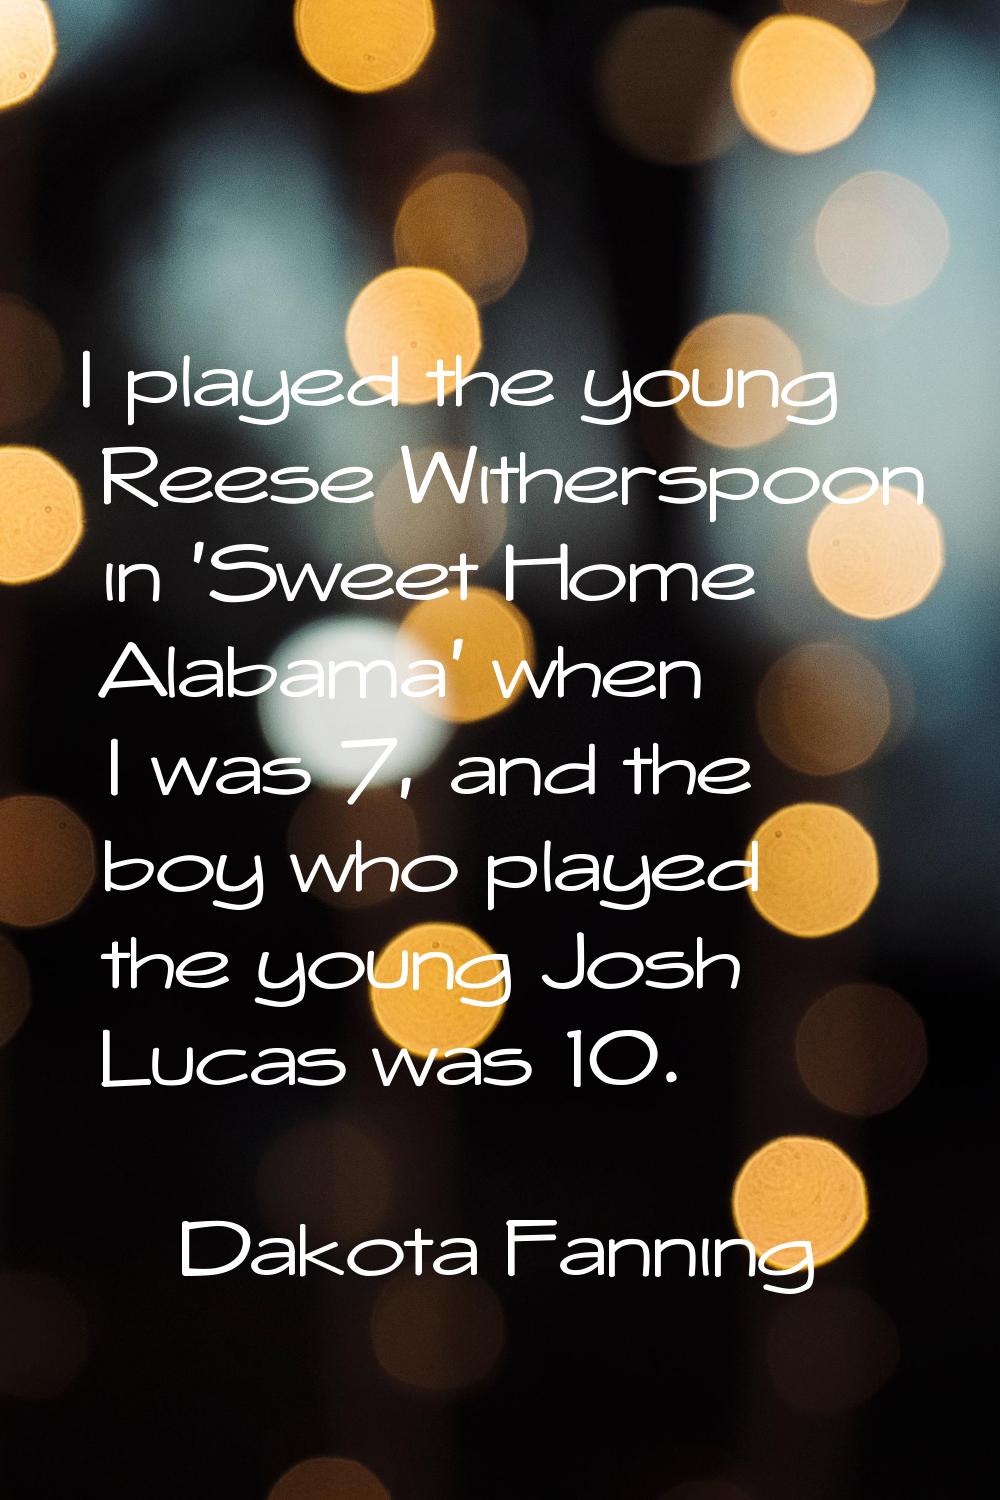 I played the young Reese Witherspoon in 'Sweet Home Alabama' when I was 7, and the boy who played t